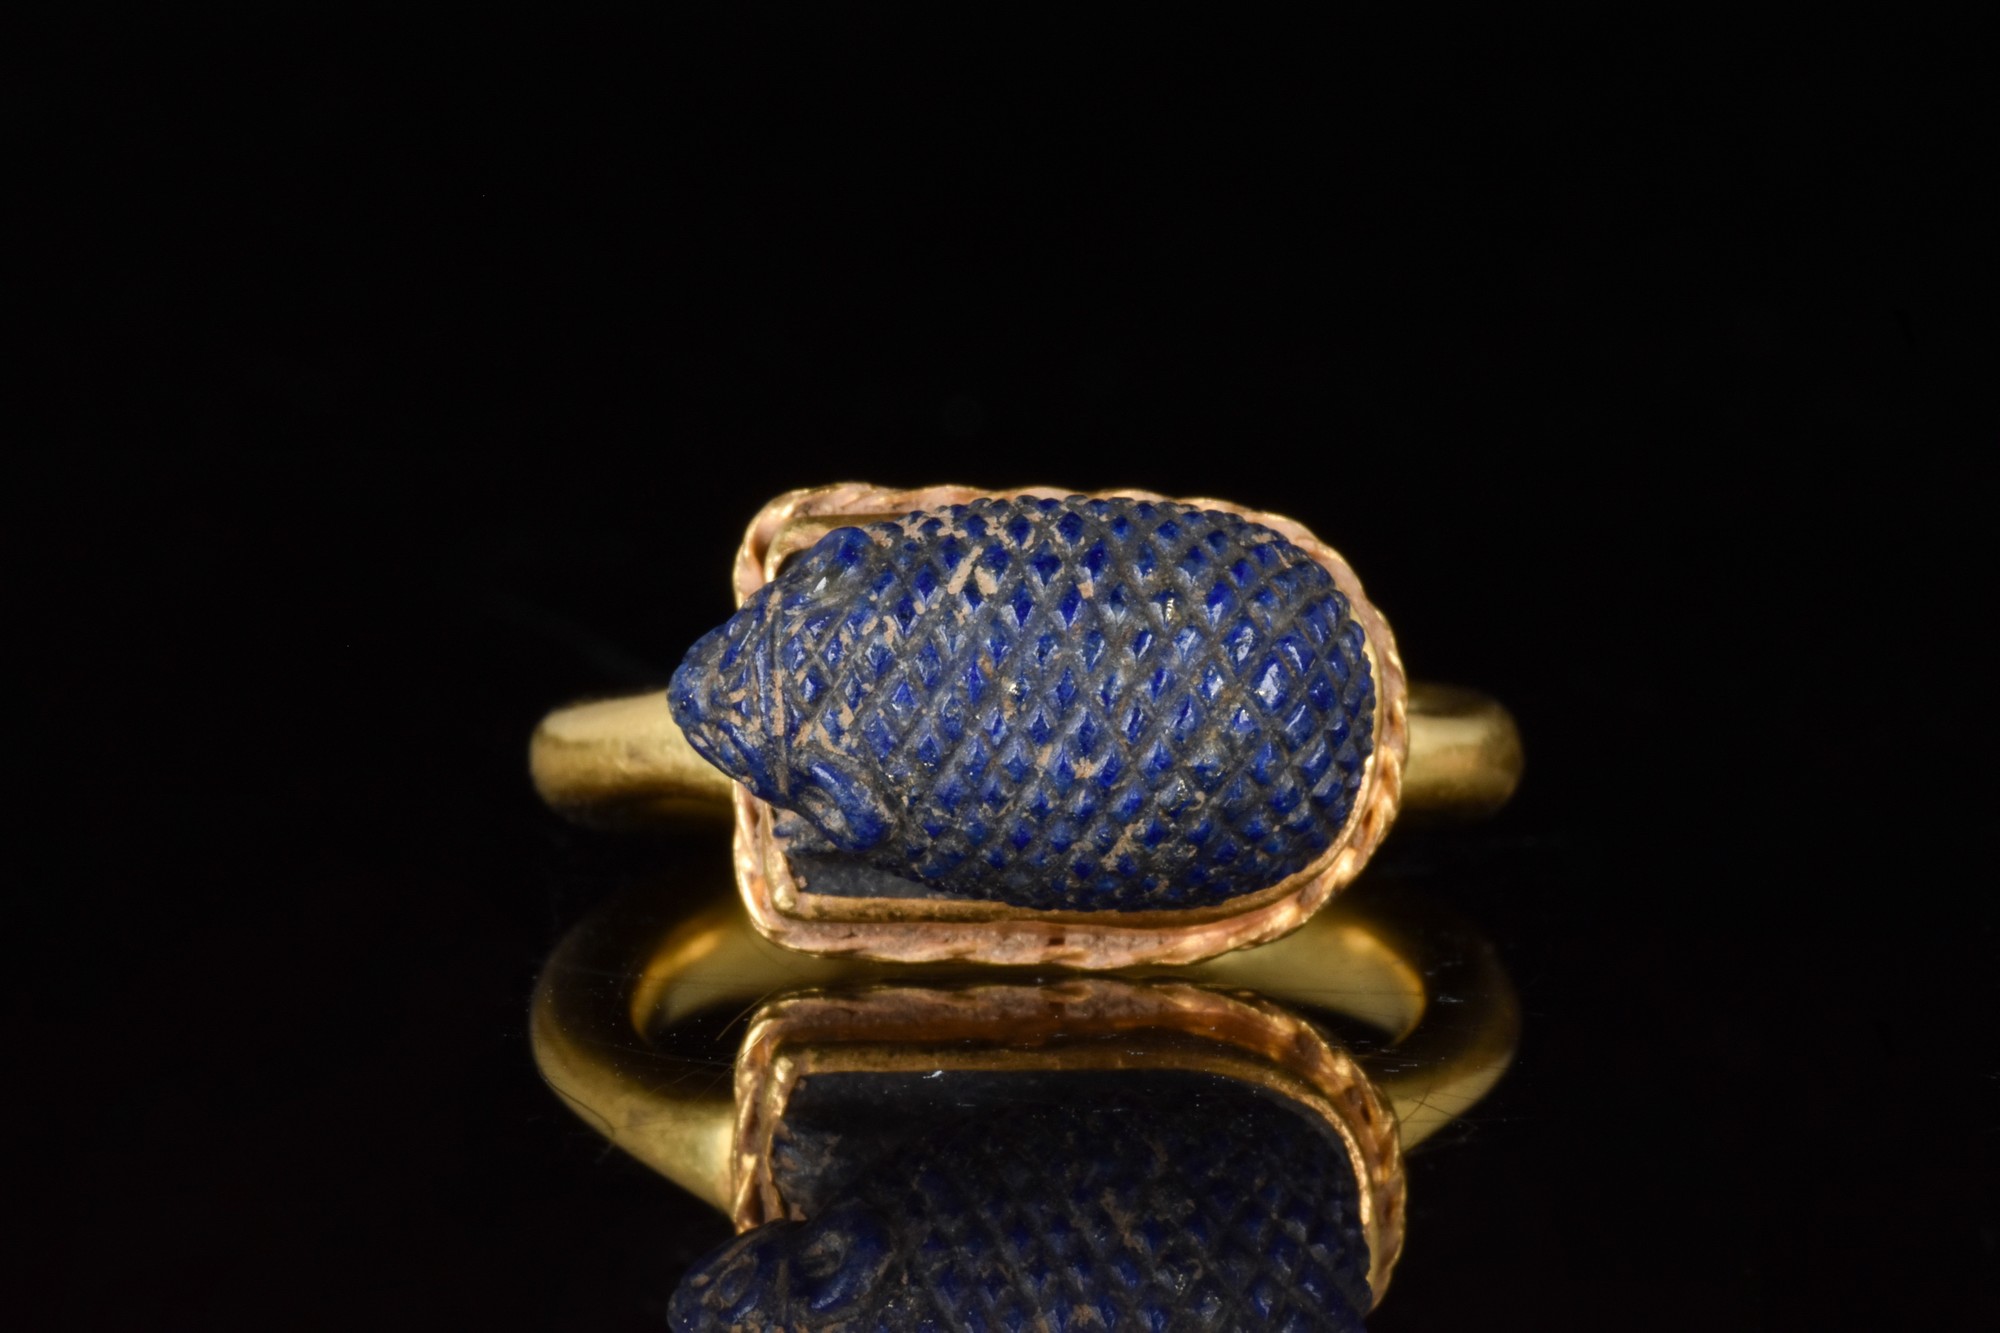 EGYPTIAN OR EASTERN LAPIS HEDGEHOG GOLD RING - Image 5 of 7